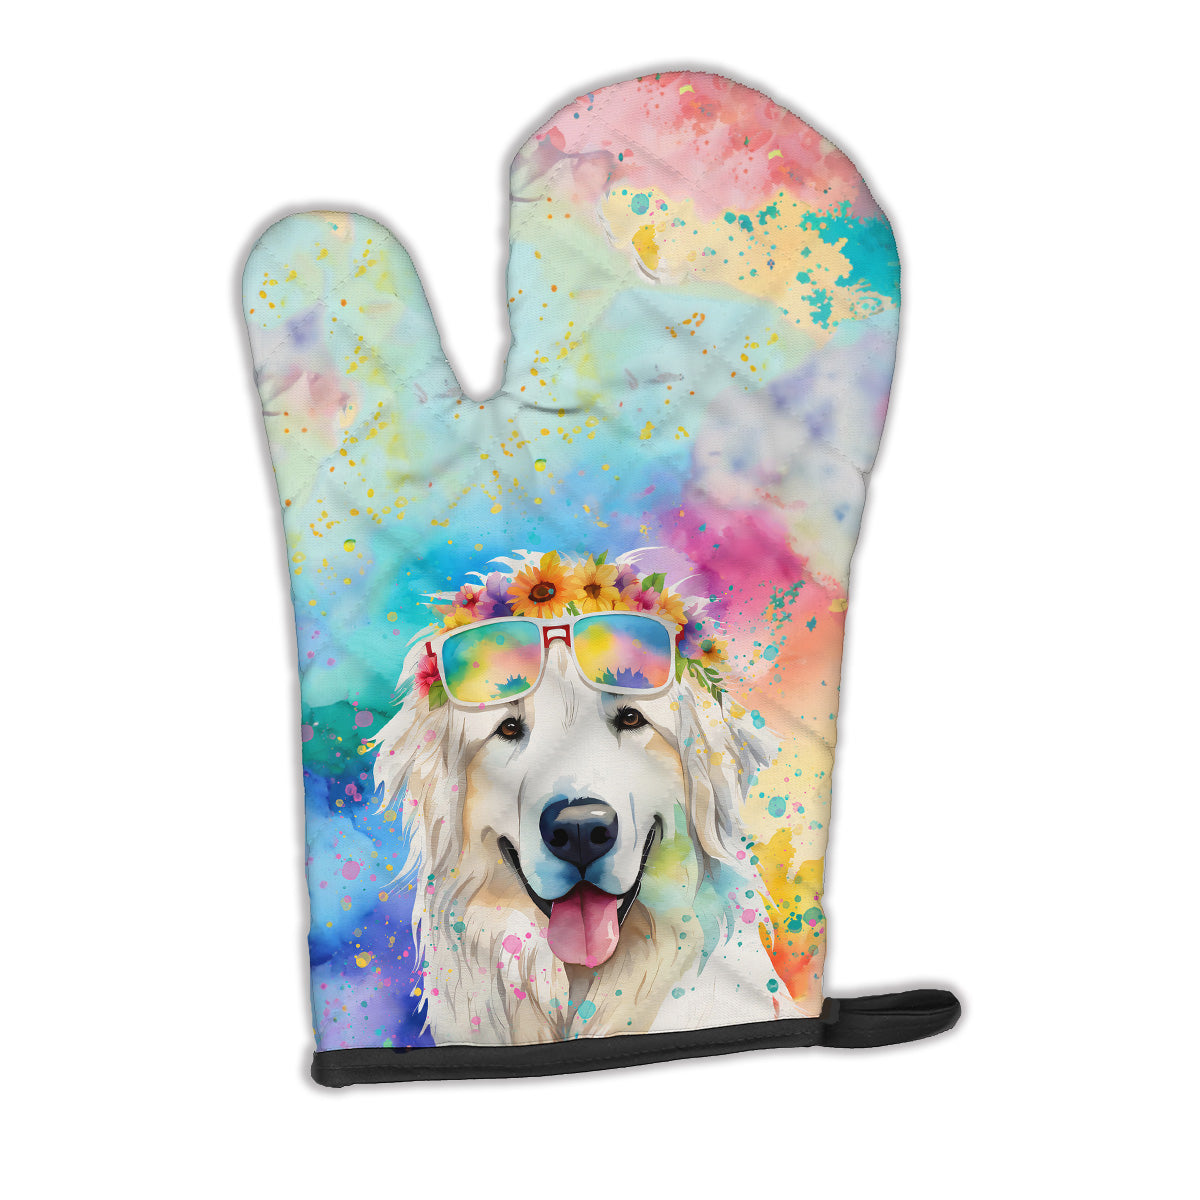 Buy this Great Pyrenees Hippie Dawg Oven Mitt